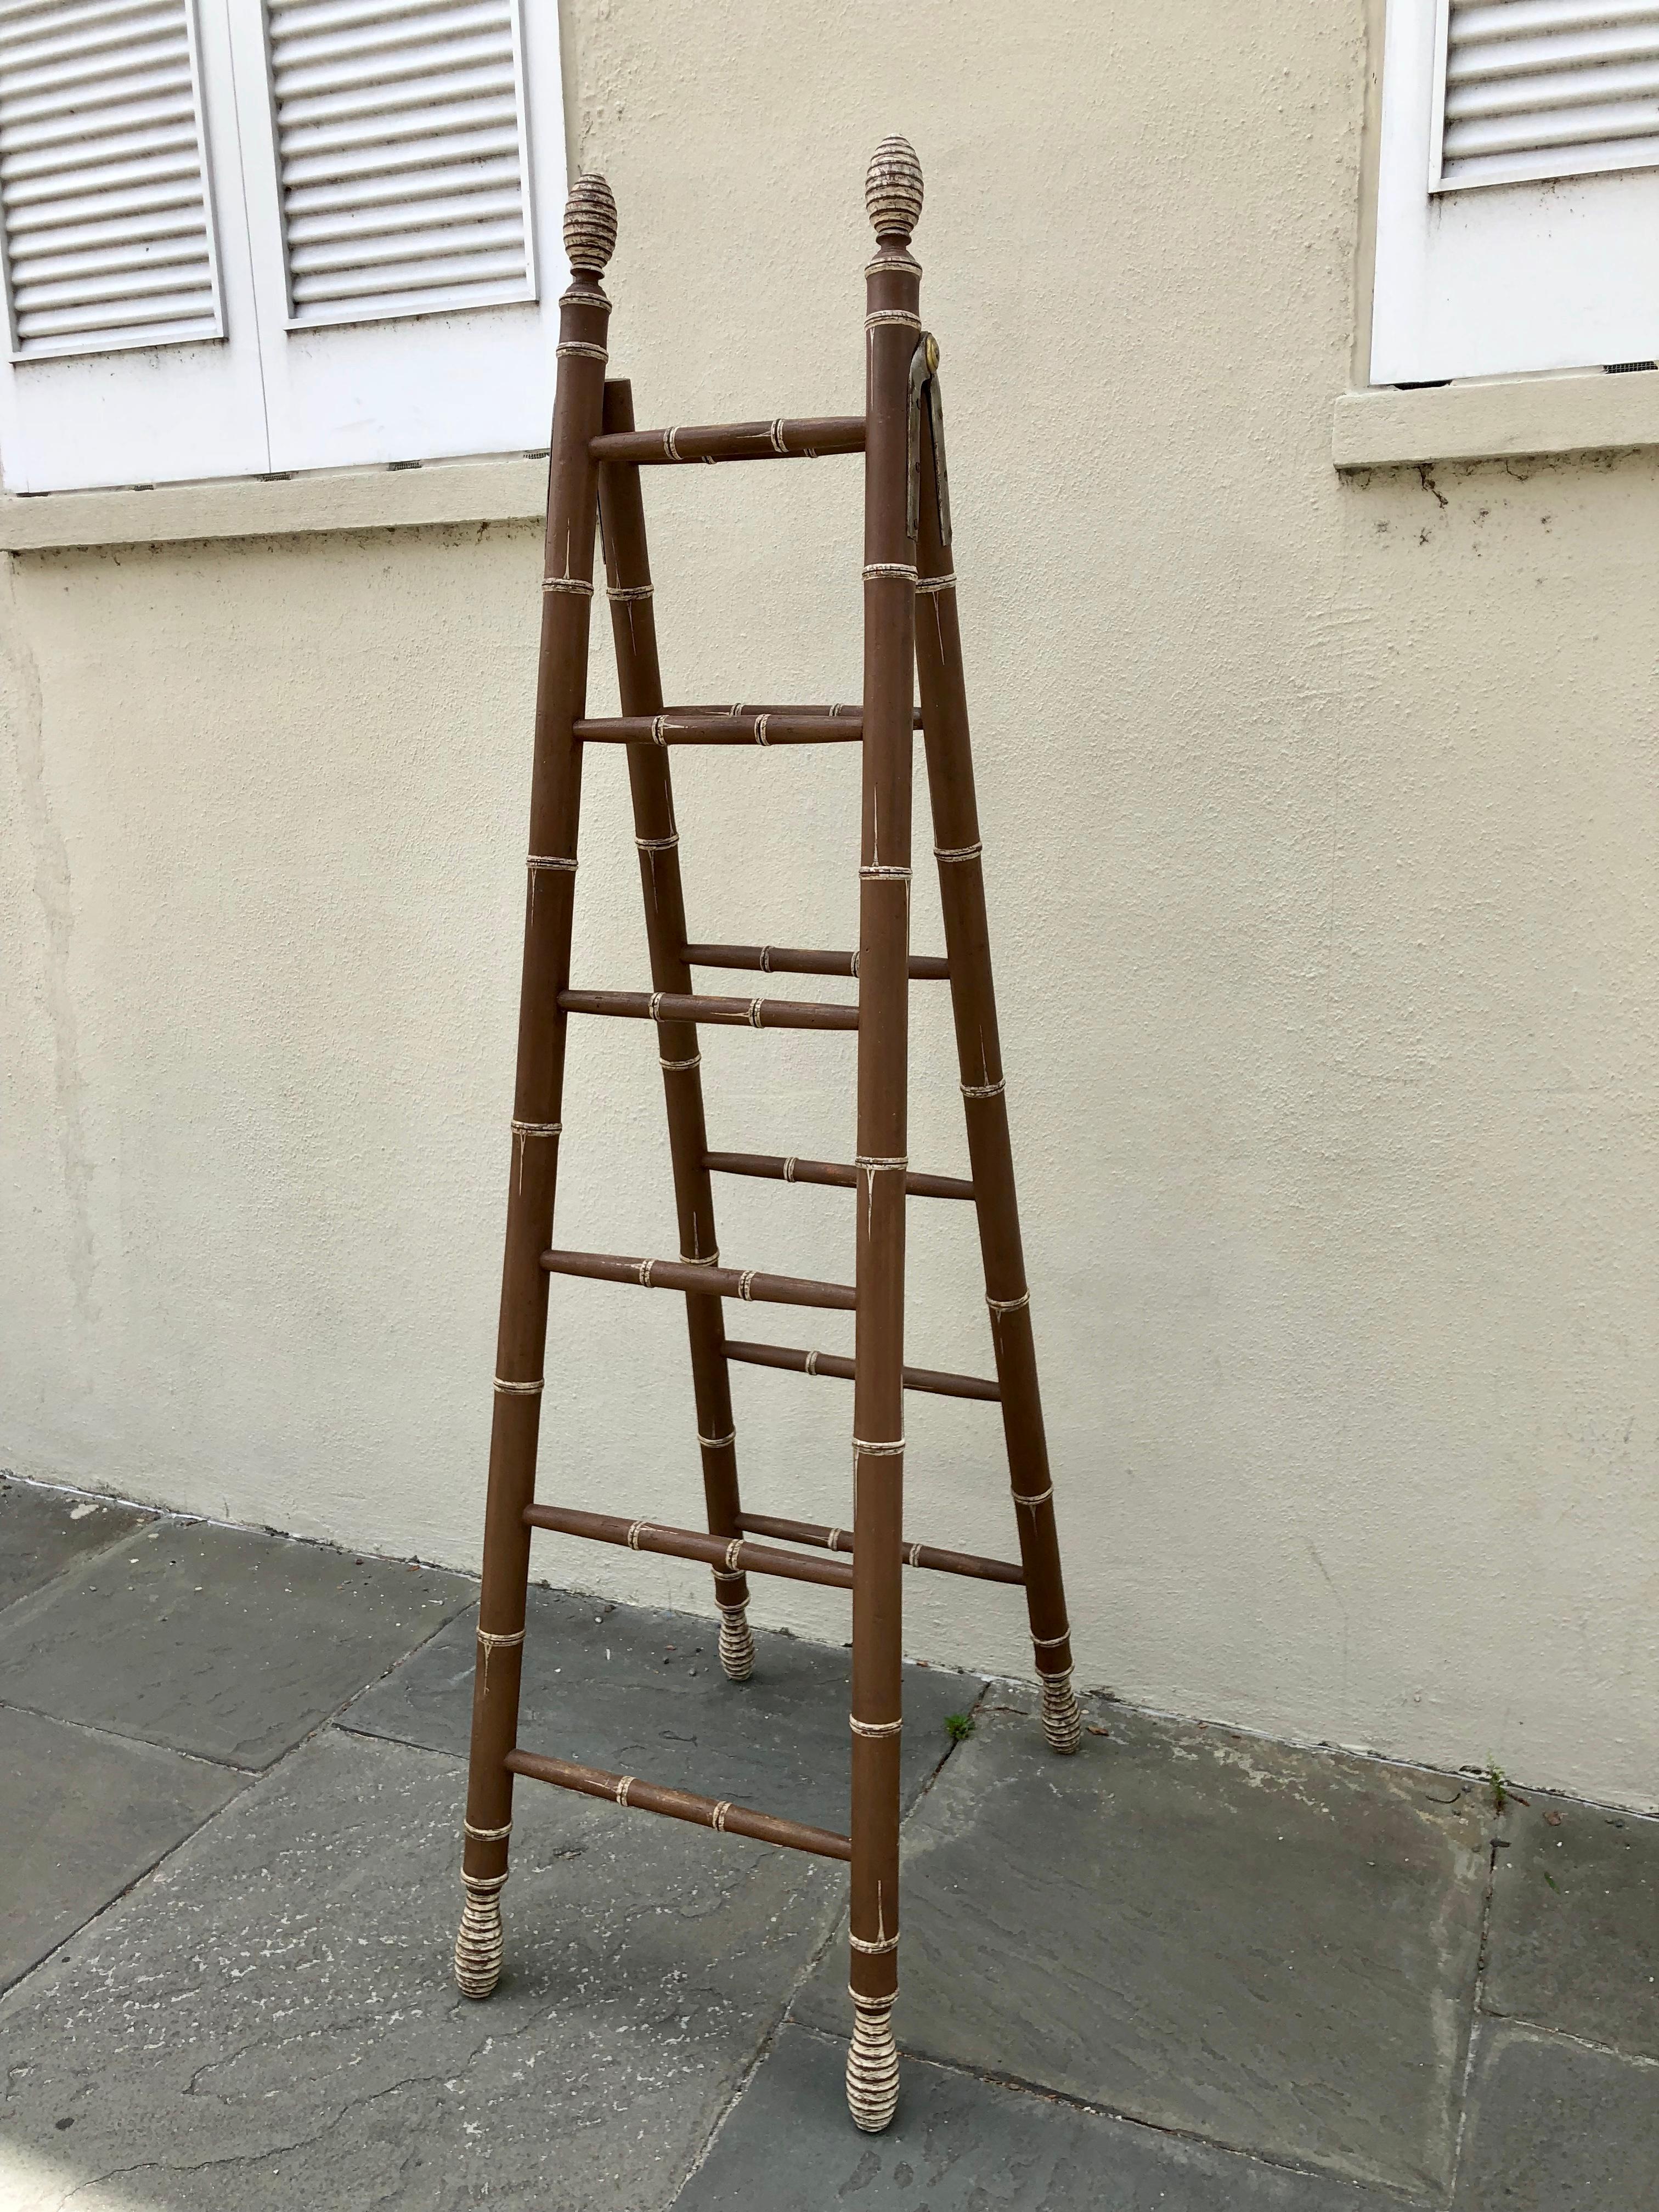 Mid-19th Century English Faux Bamboo Library Ladder in Brown Paint with White Accents, circa 1830